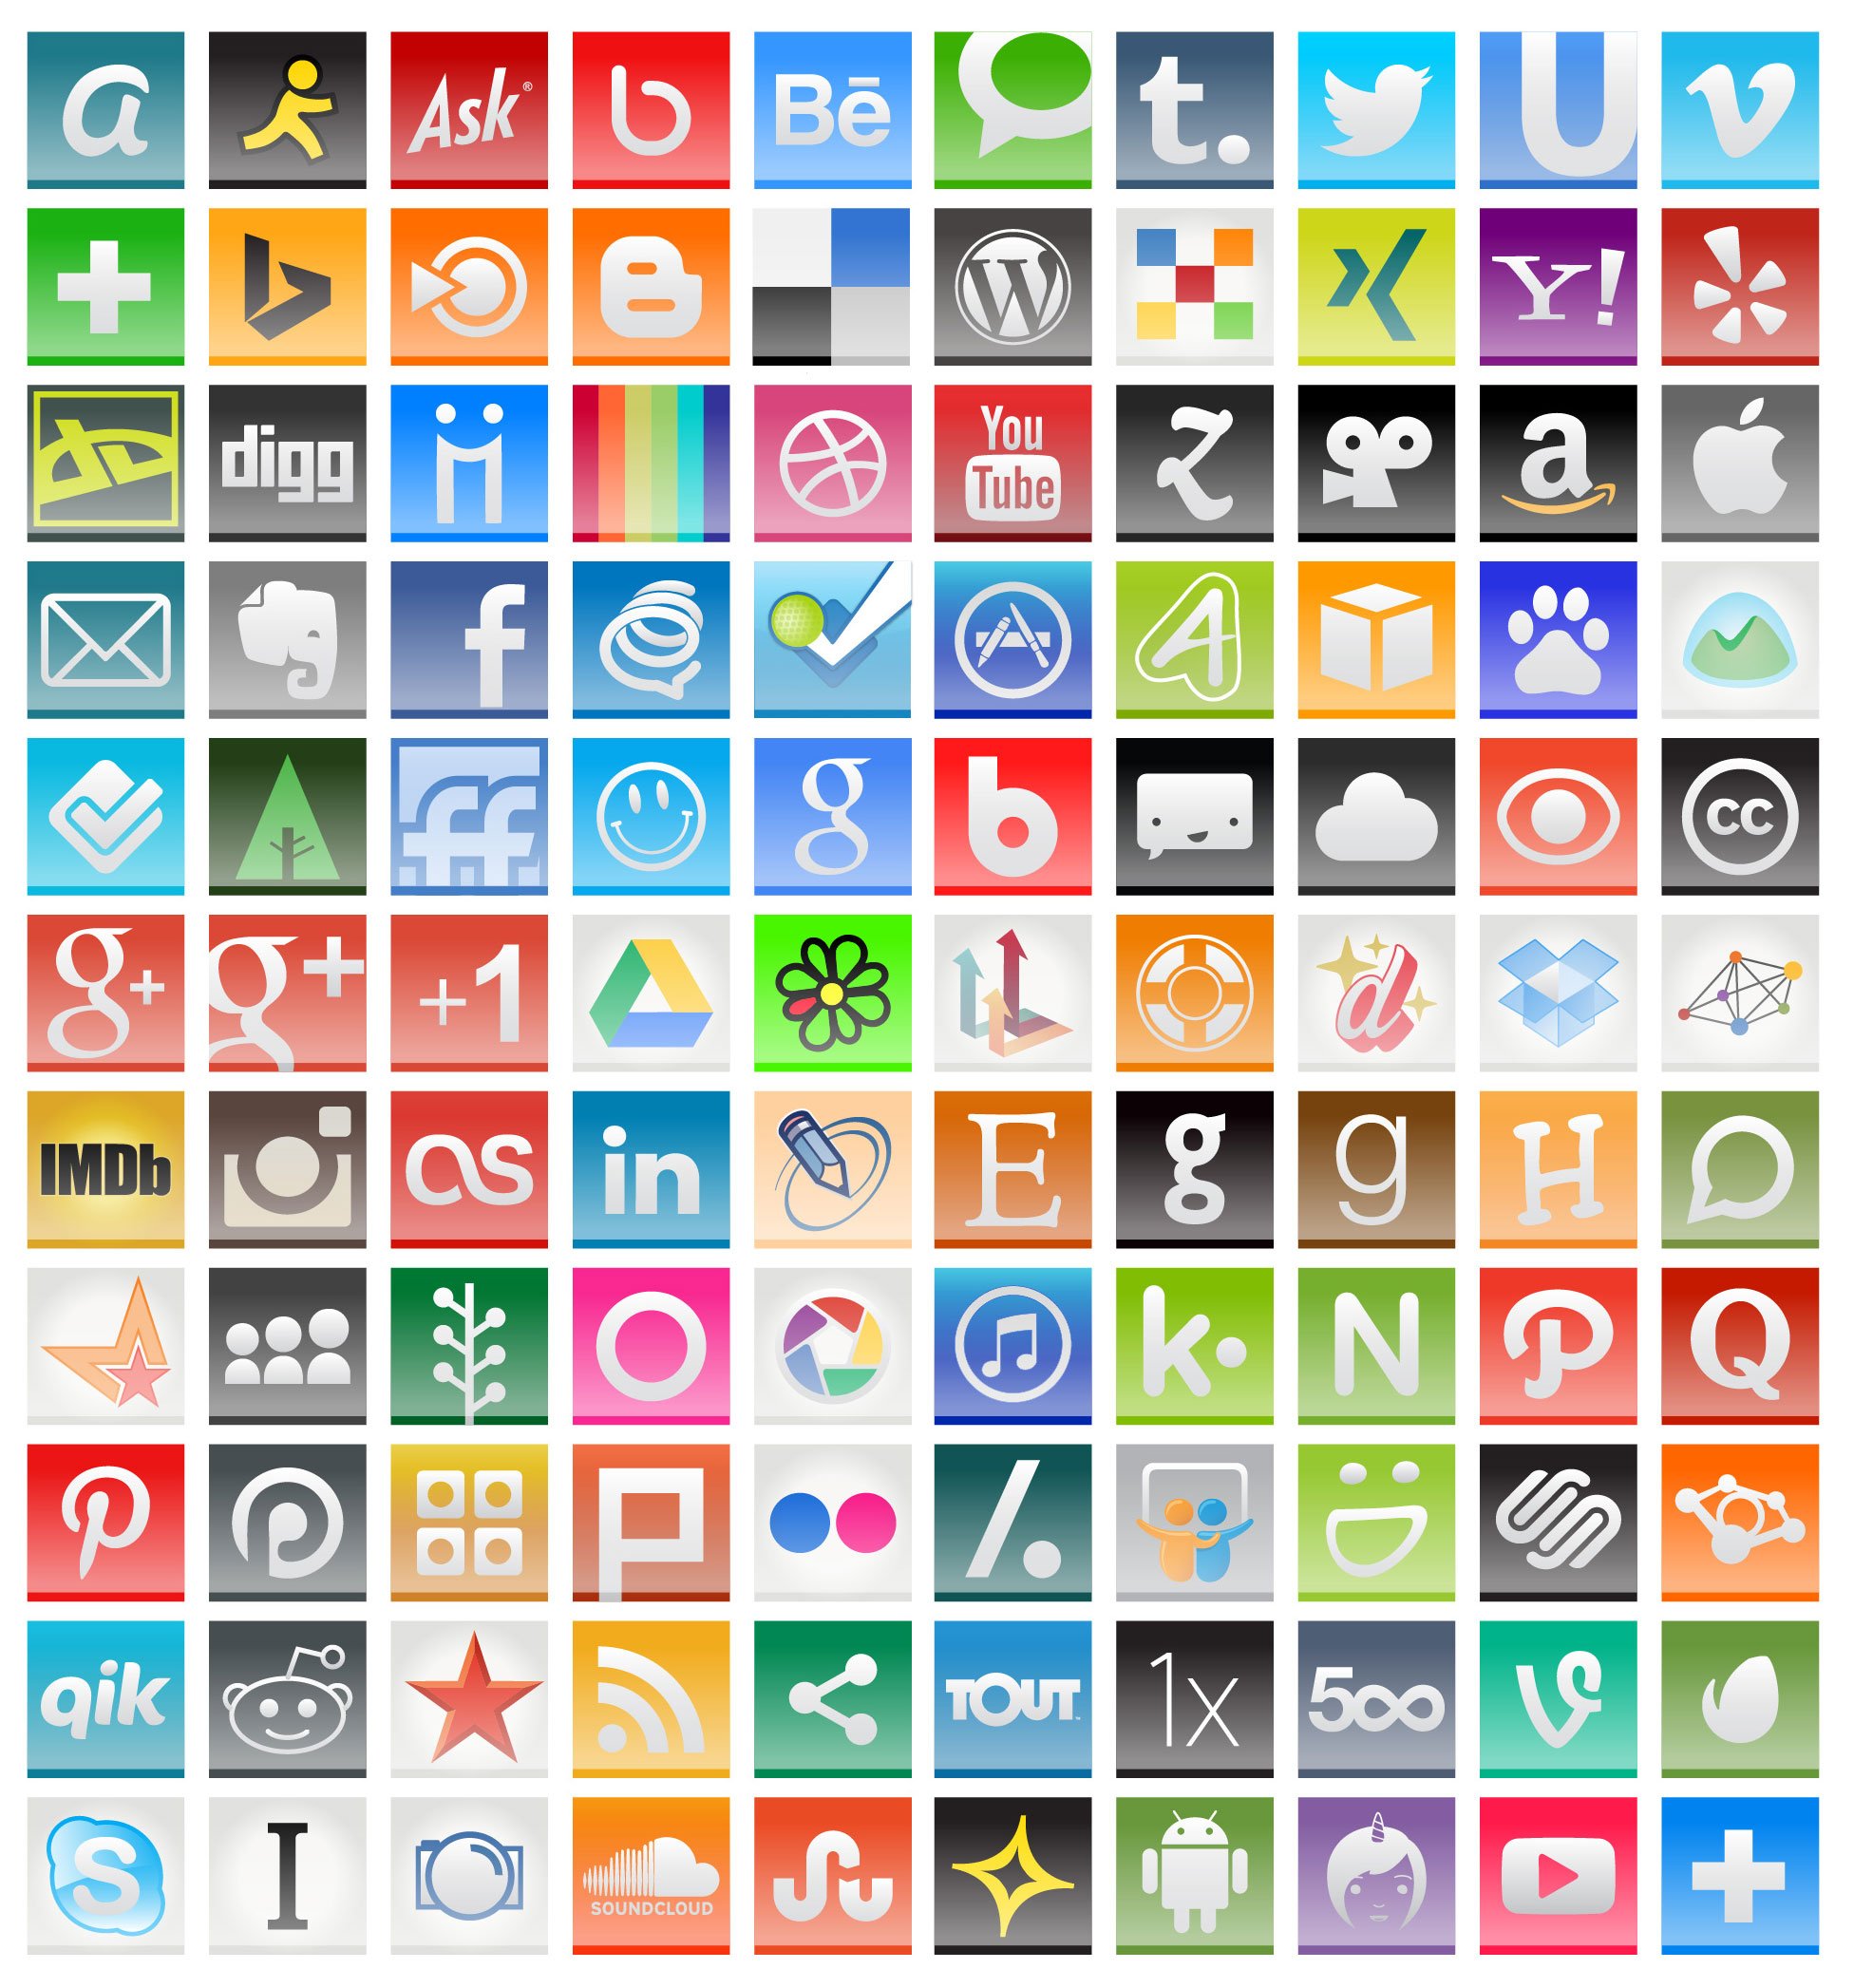 110 Free Social Media Icons for 2014 Vector + PNGs